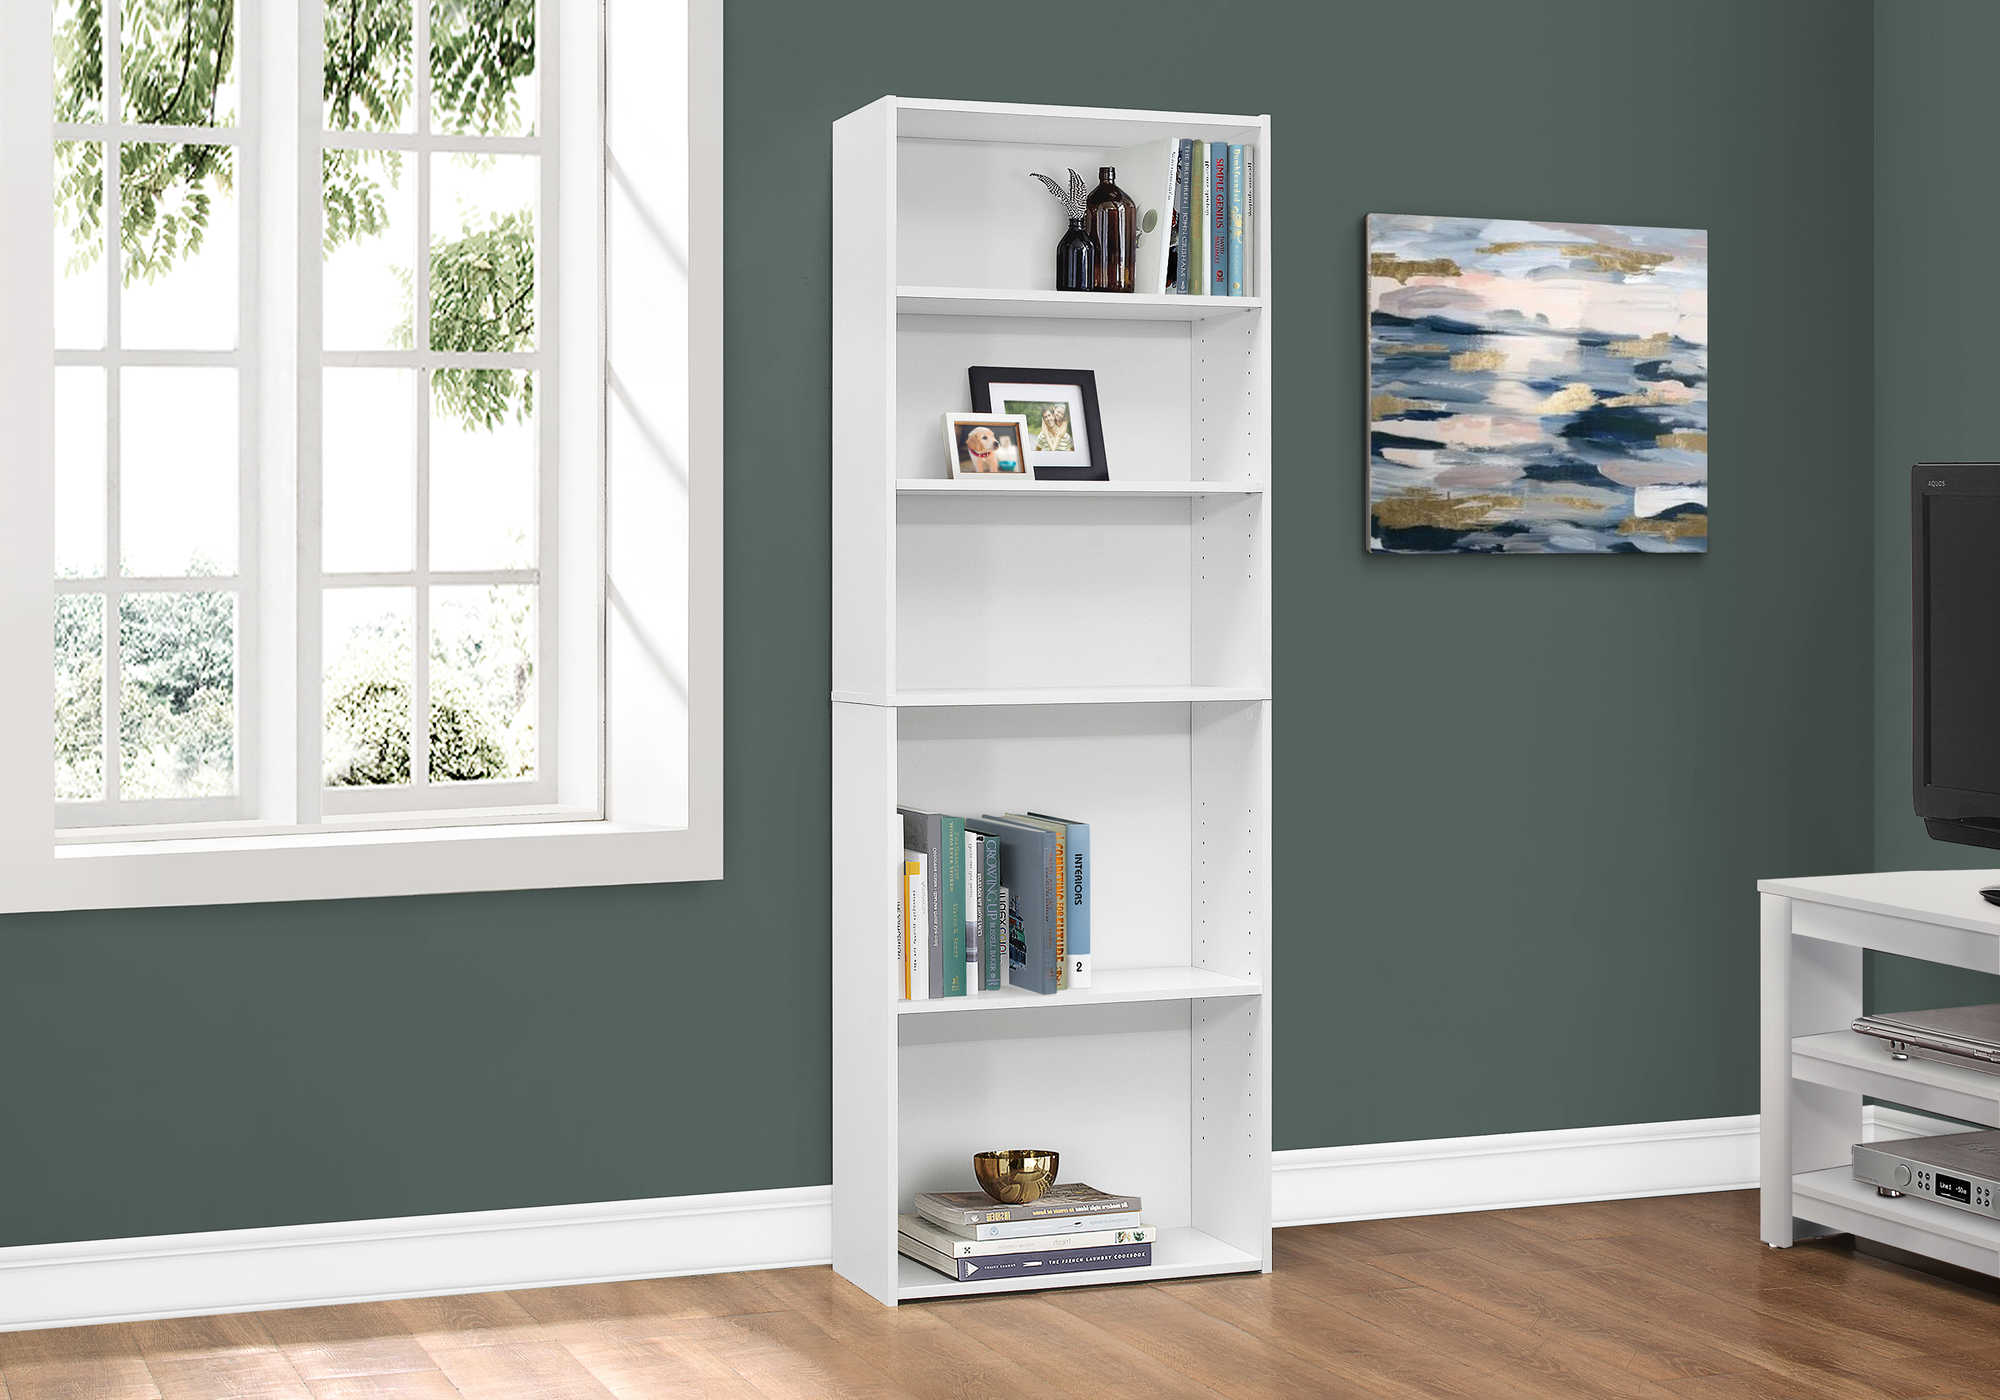 BOOKCASE - 72"H / WHITE WITH 5 SHELVES